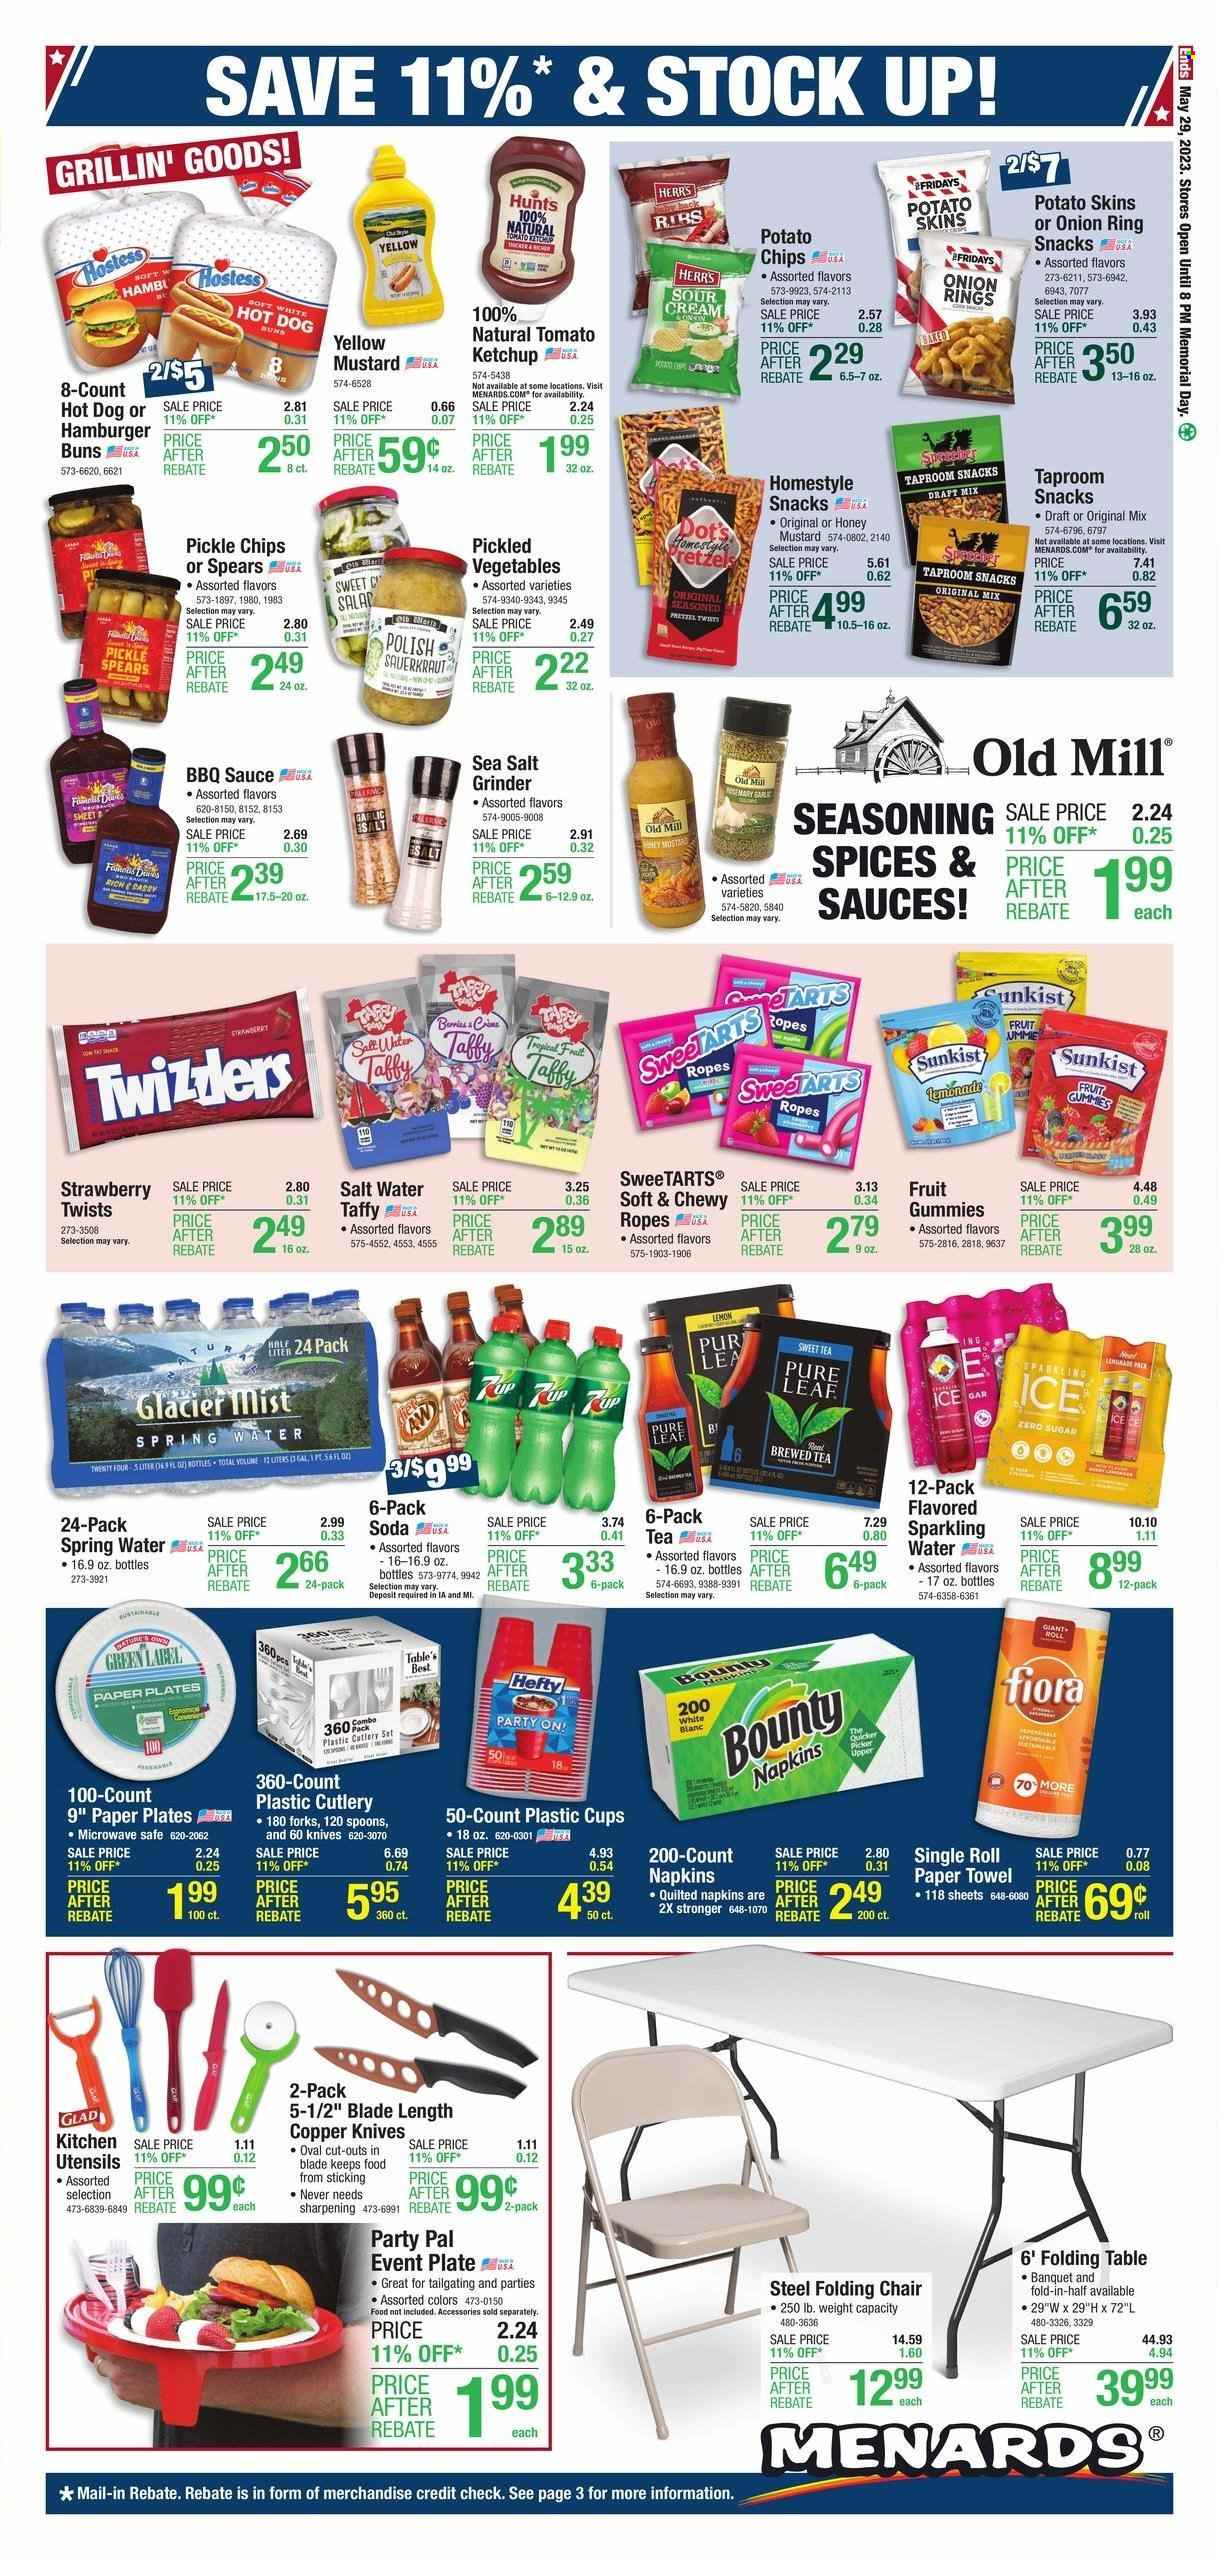 thumbnail - Menards Flyer - 05/17/2023 - 05/29/2023 - Sales products - pretzels, buns, garlic, onion rings, hamburger, sauce, sour cream, snack, Bounty, potato chips, chips, sauerkraut, pickled cabbage, spice, BBQ sauce, mustard, honey mustard, ketchup, lemonade, soft drink, 7UP, spring water, flavored water, soda, sparkling water, water, tea, Pure Leaf, ribs, pork meat, pork ribs, pork back ribs, napkins, paper towels, Hefty, knife, safe, salt grinder, spoon, utensils, plate, cutlery set, cup, disposable cutlery, paper plate, grinder, table, chair, folding table, folding chair, polish. Page 9.